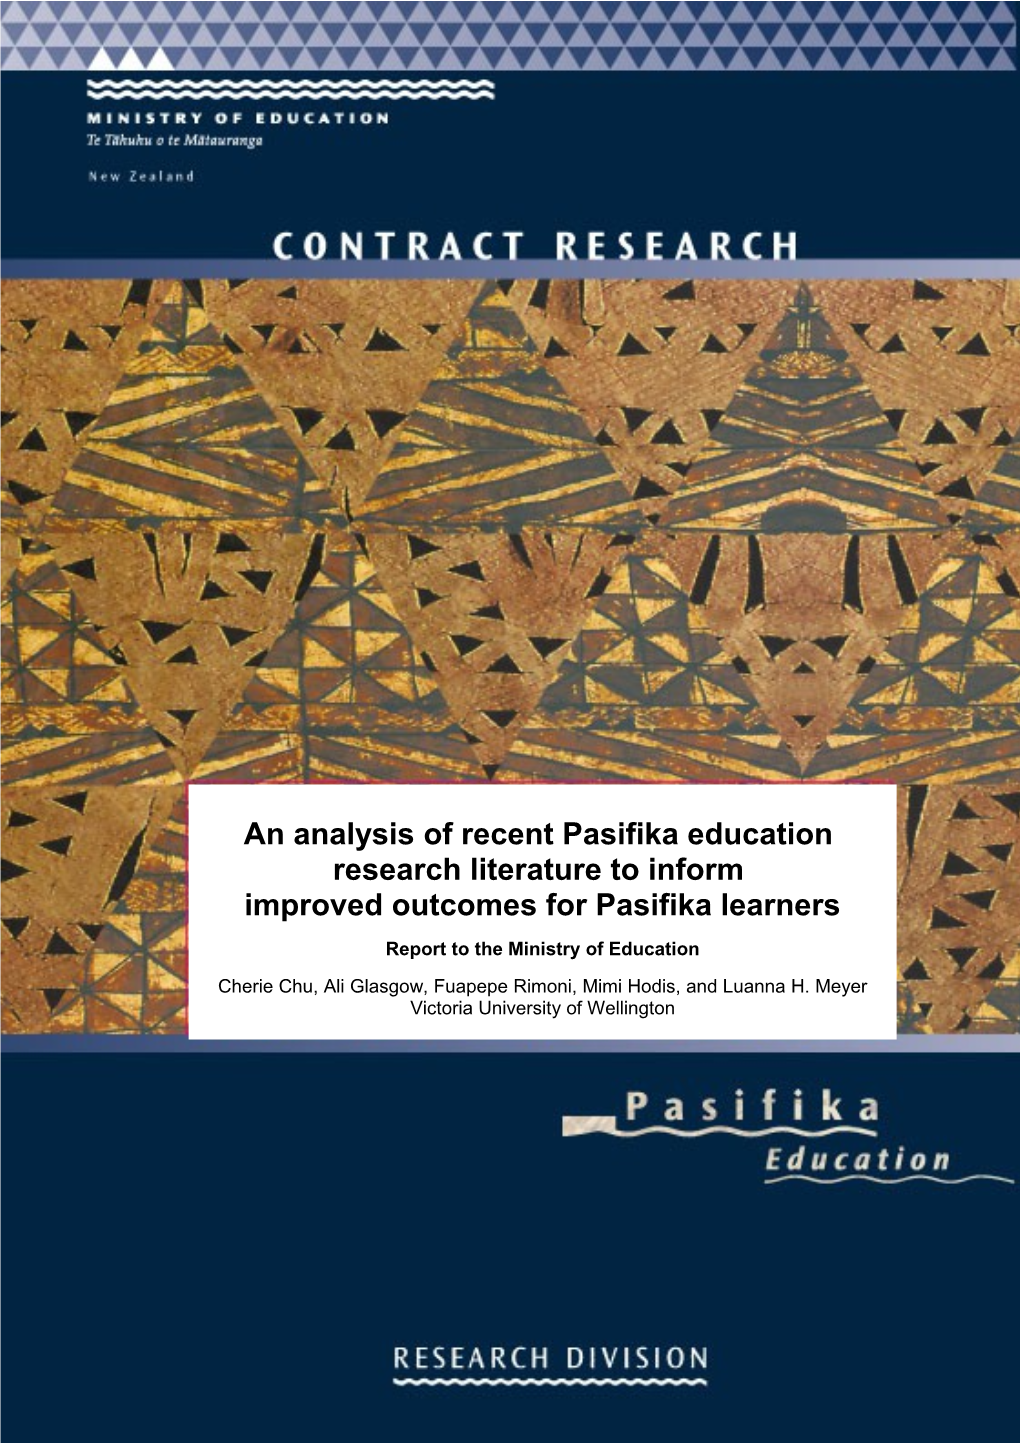 An Analysis of Recent Pasifika Education Research Literature to Inform Improved Outcomes